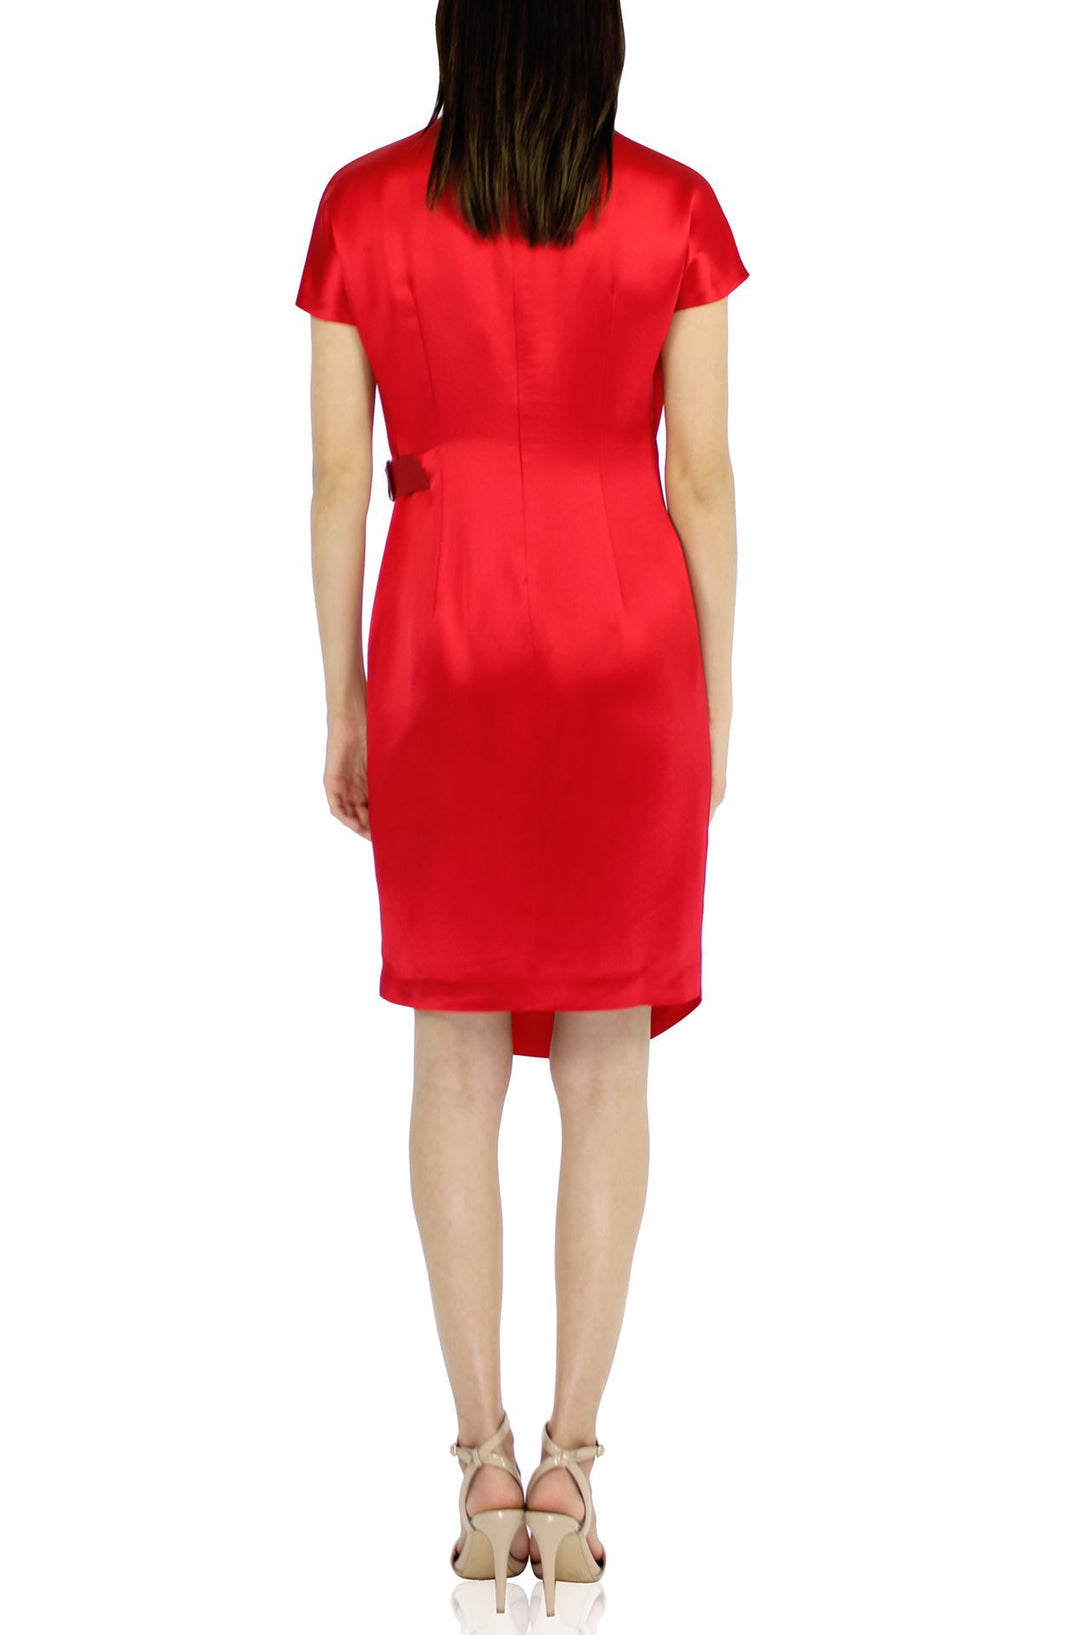 Designer-Mini-Belted-Dress-In-Red-From-Kyle.